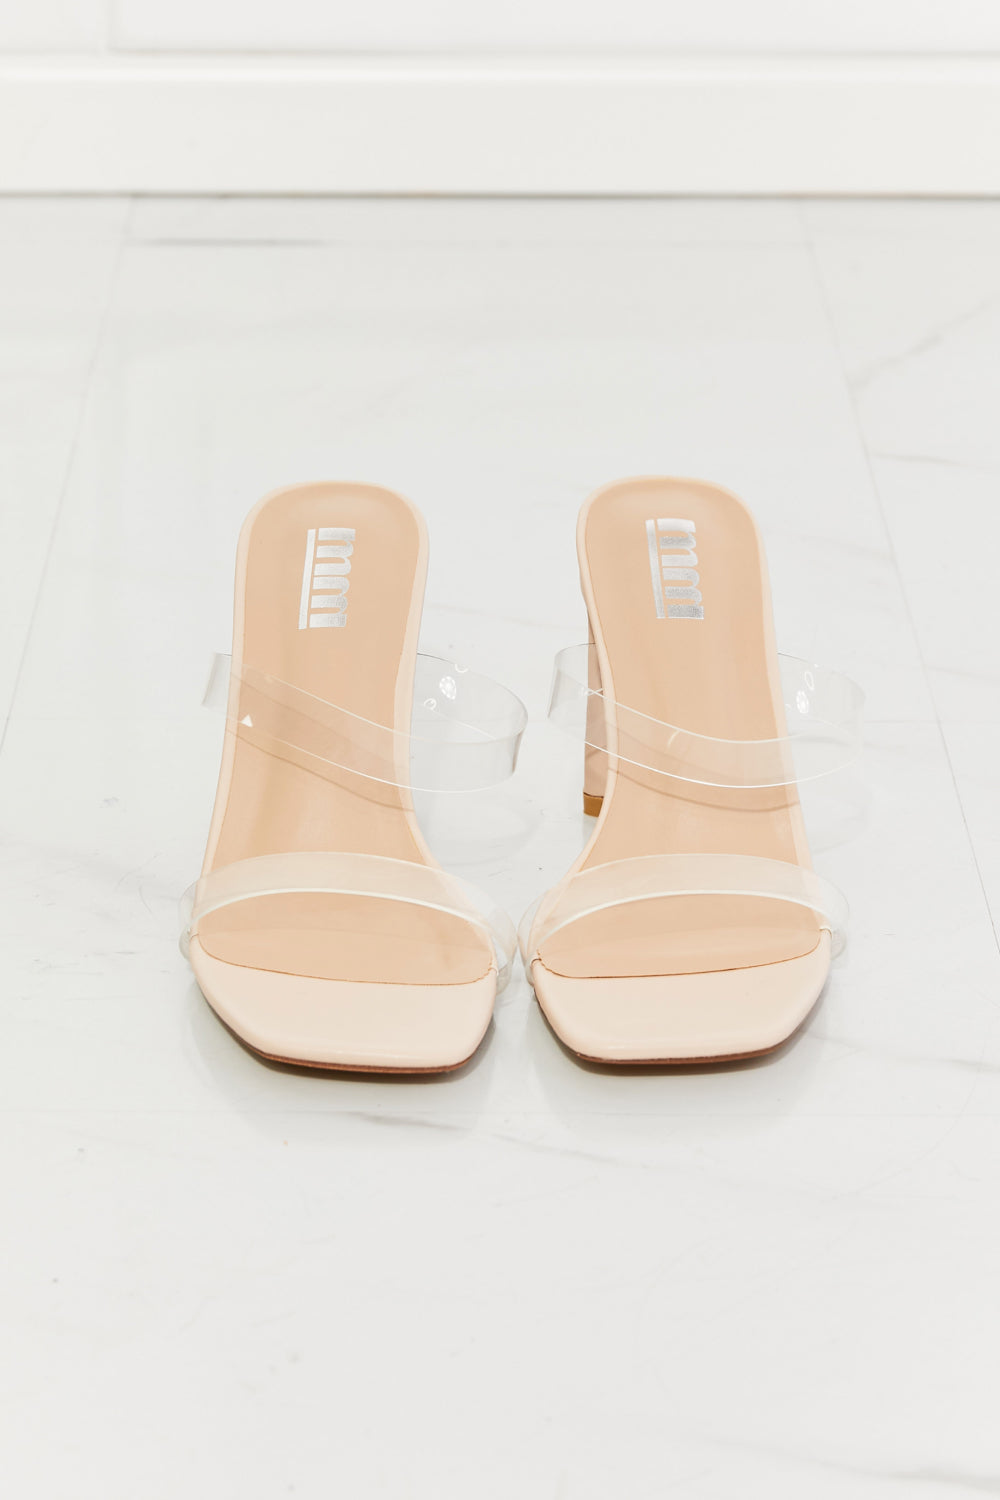 MMShoes Transparent Clear Double Band High Heeled Open Toe Slide On Sandals in Beige